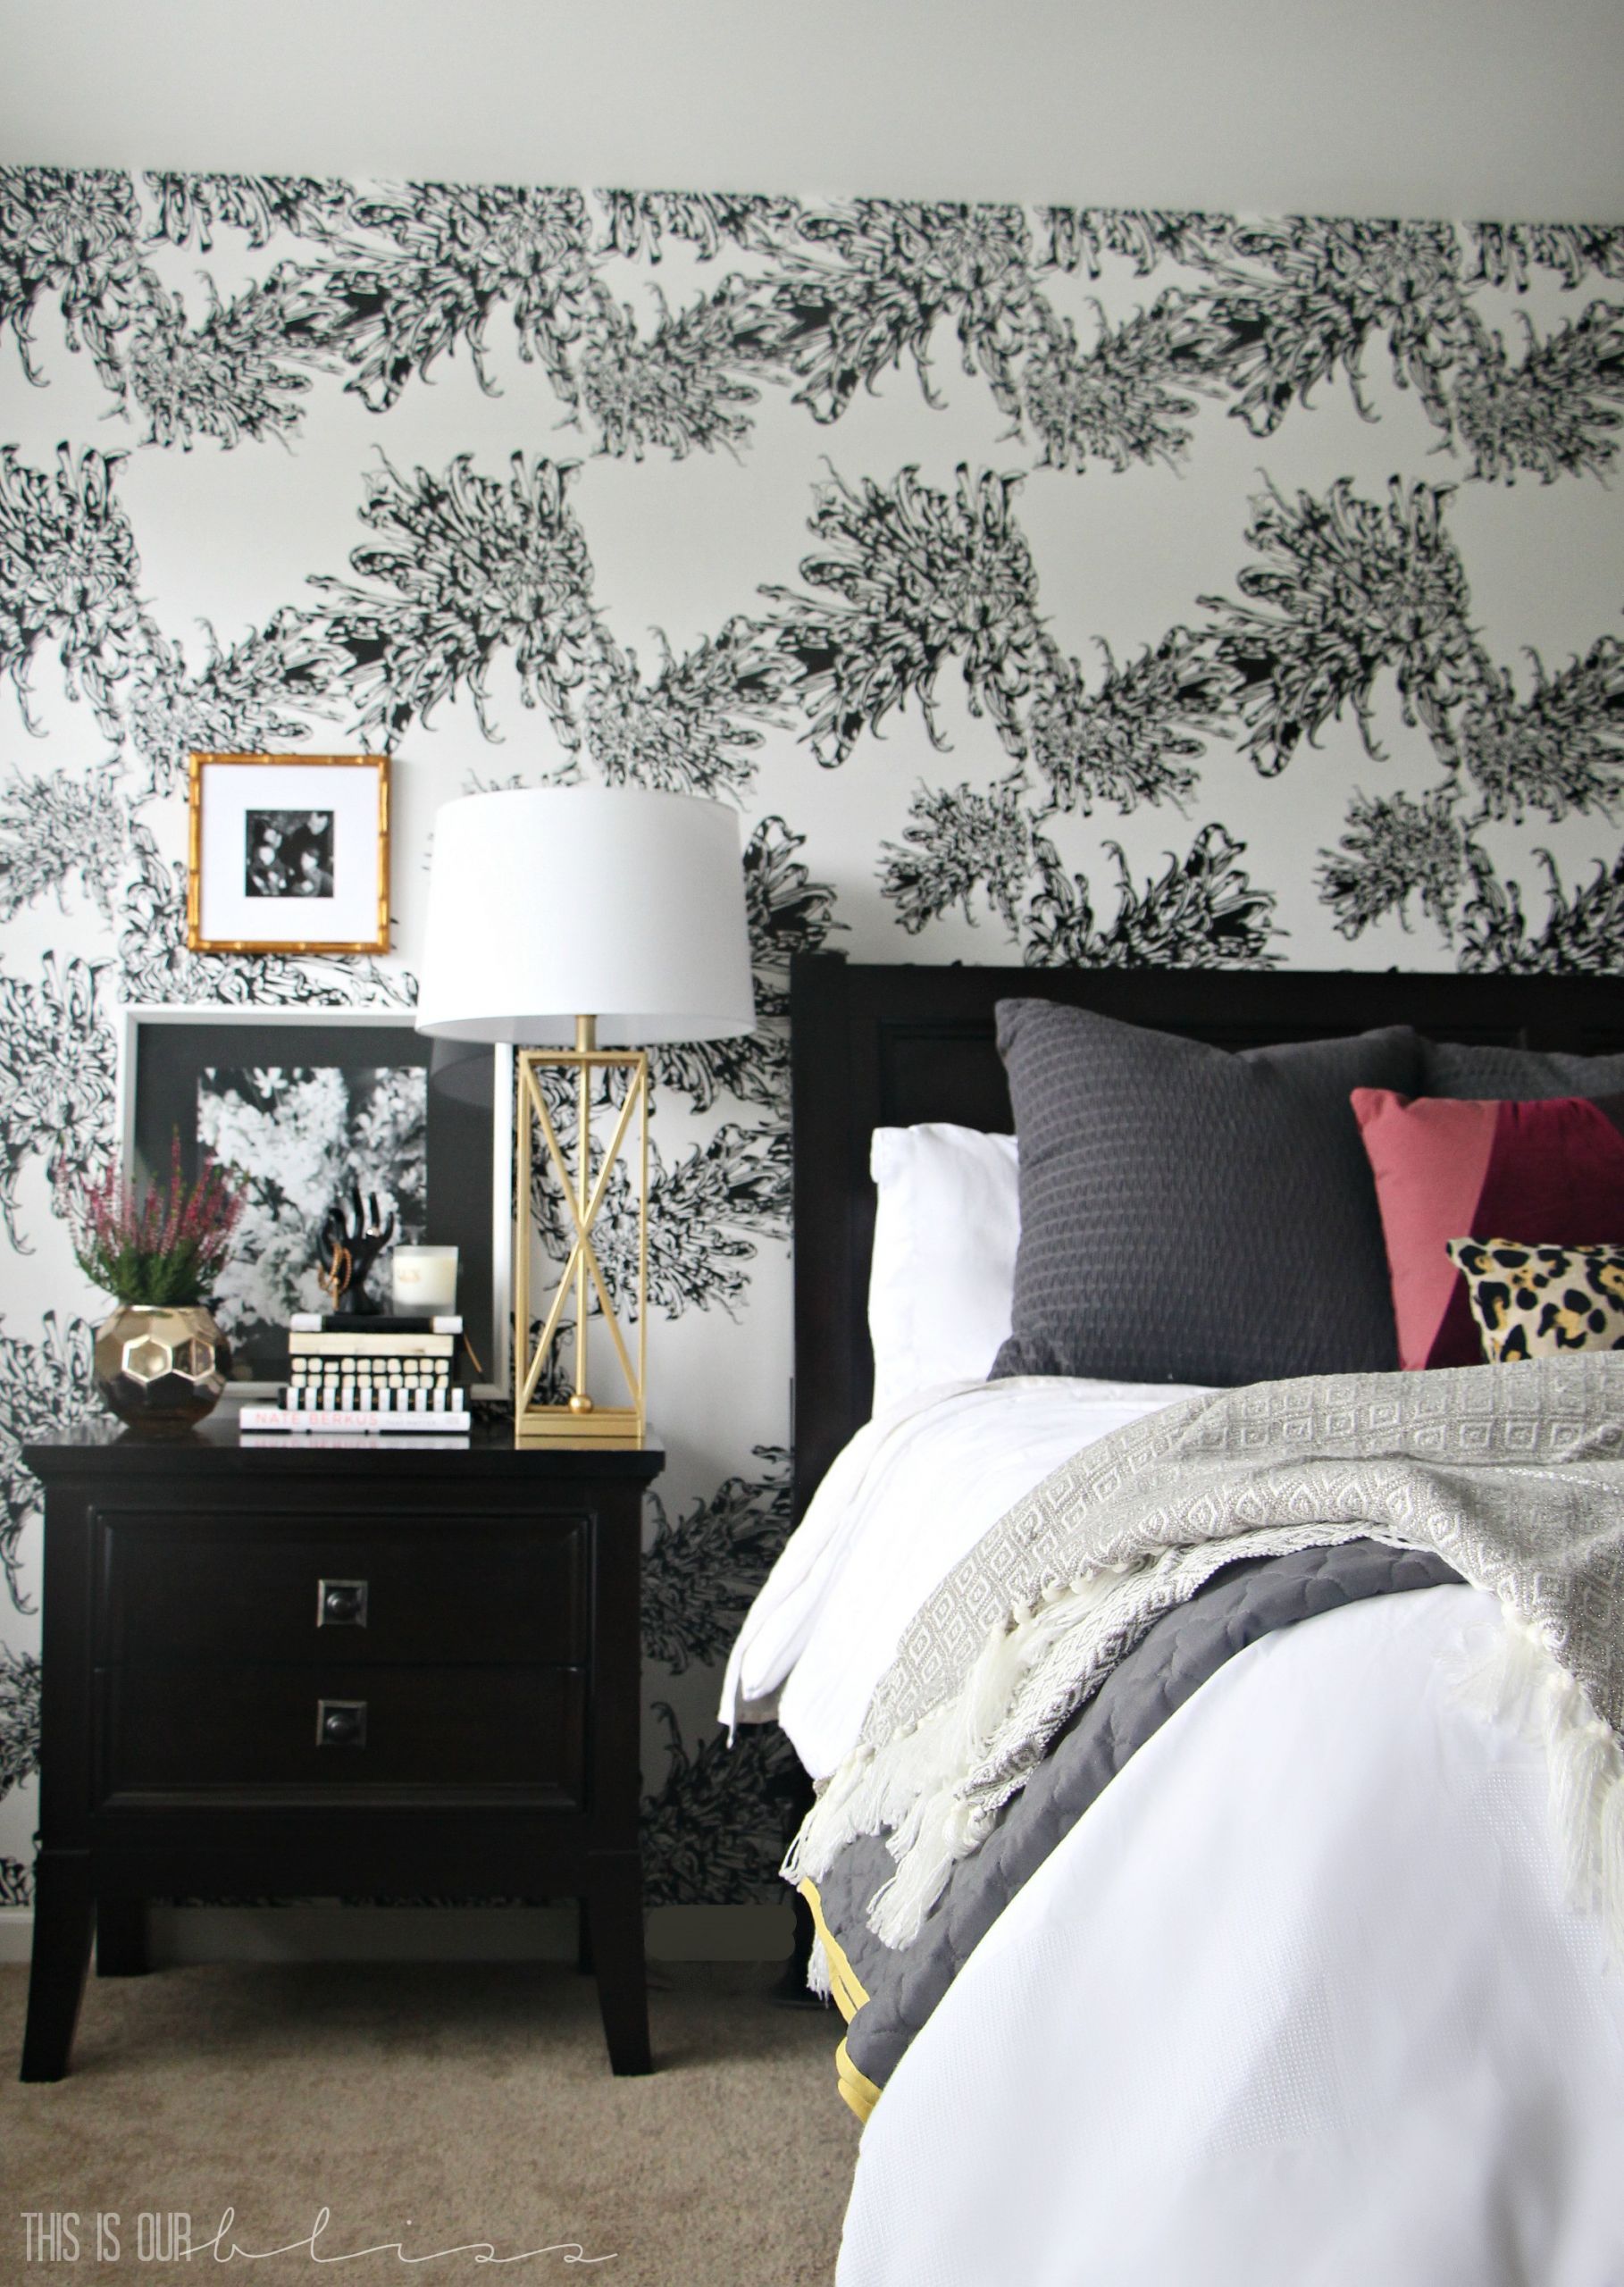 Wallpapers For Bedroom Walls
 Master Bedroom Accent Wall with Wallpaper This is our Bliss